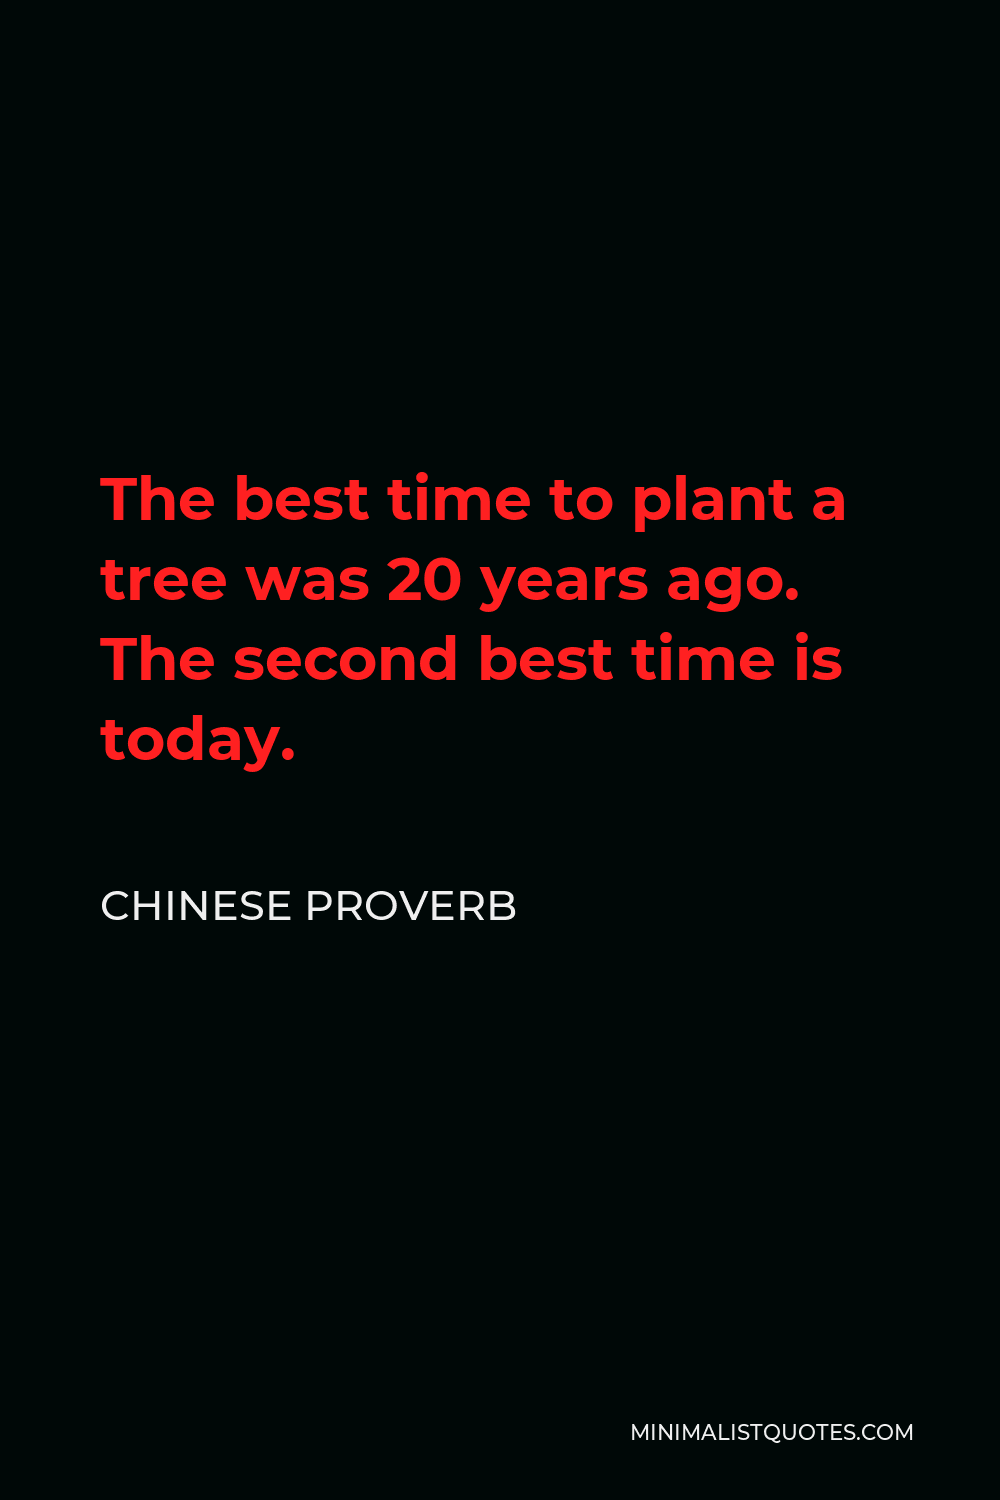 Chinese Proverb Quote - The best time to plant a tree was 20 years ago. The second best time is today.